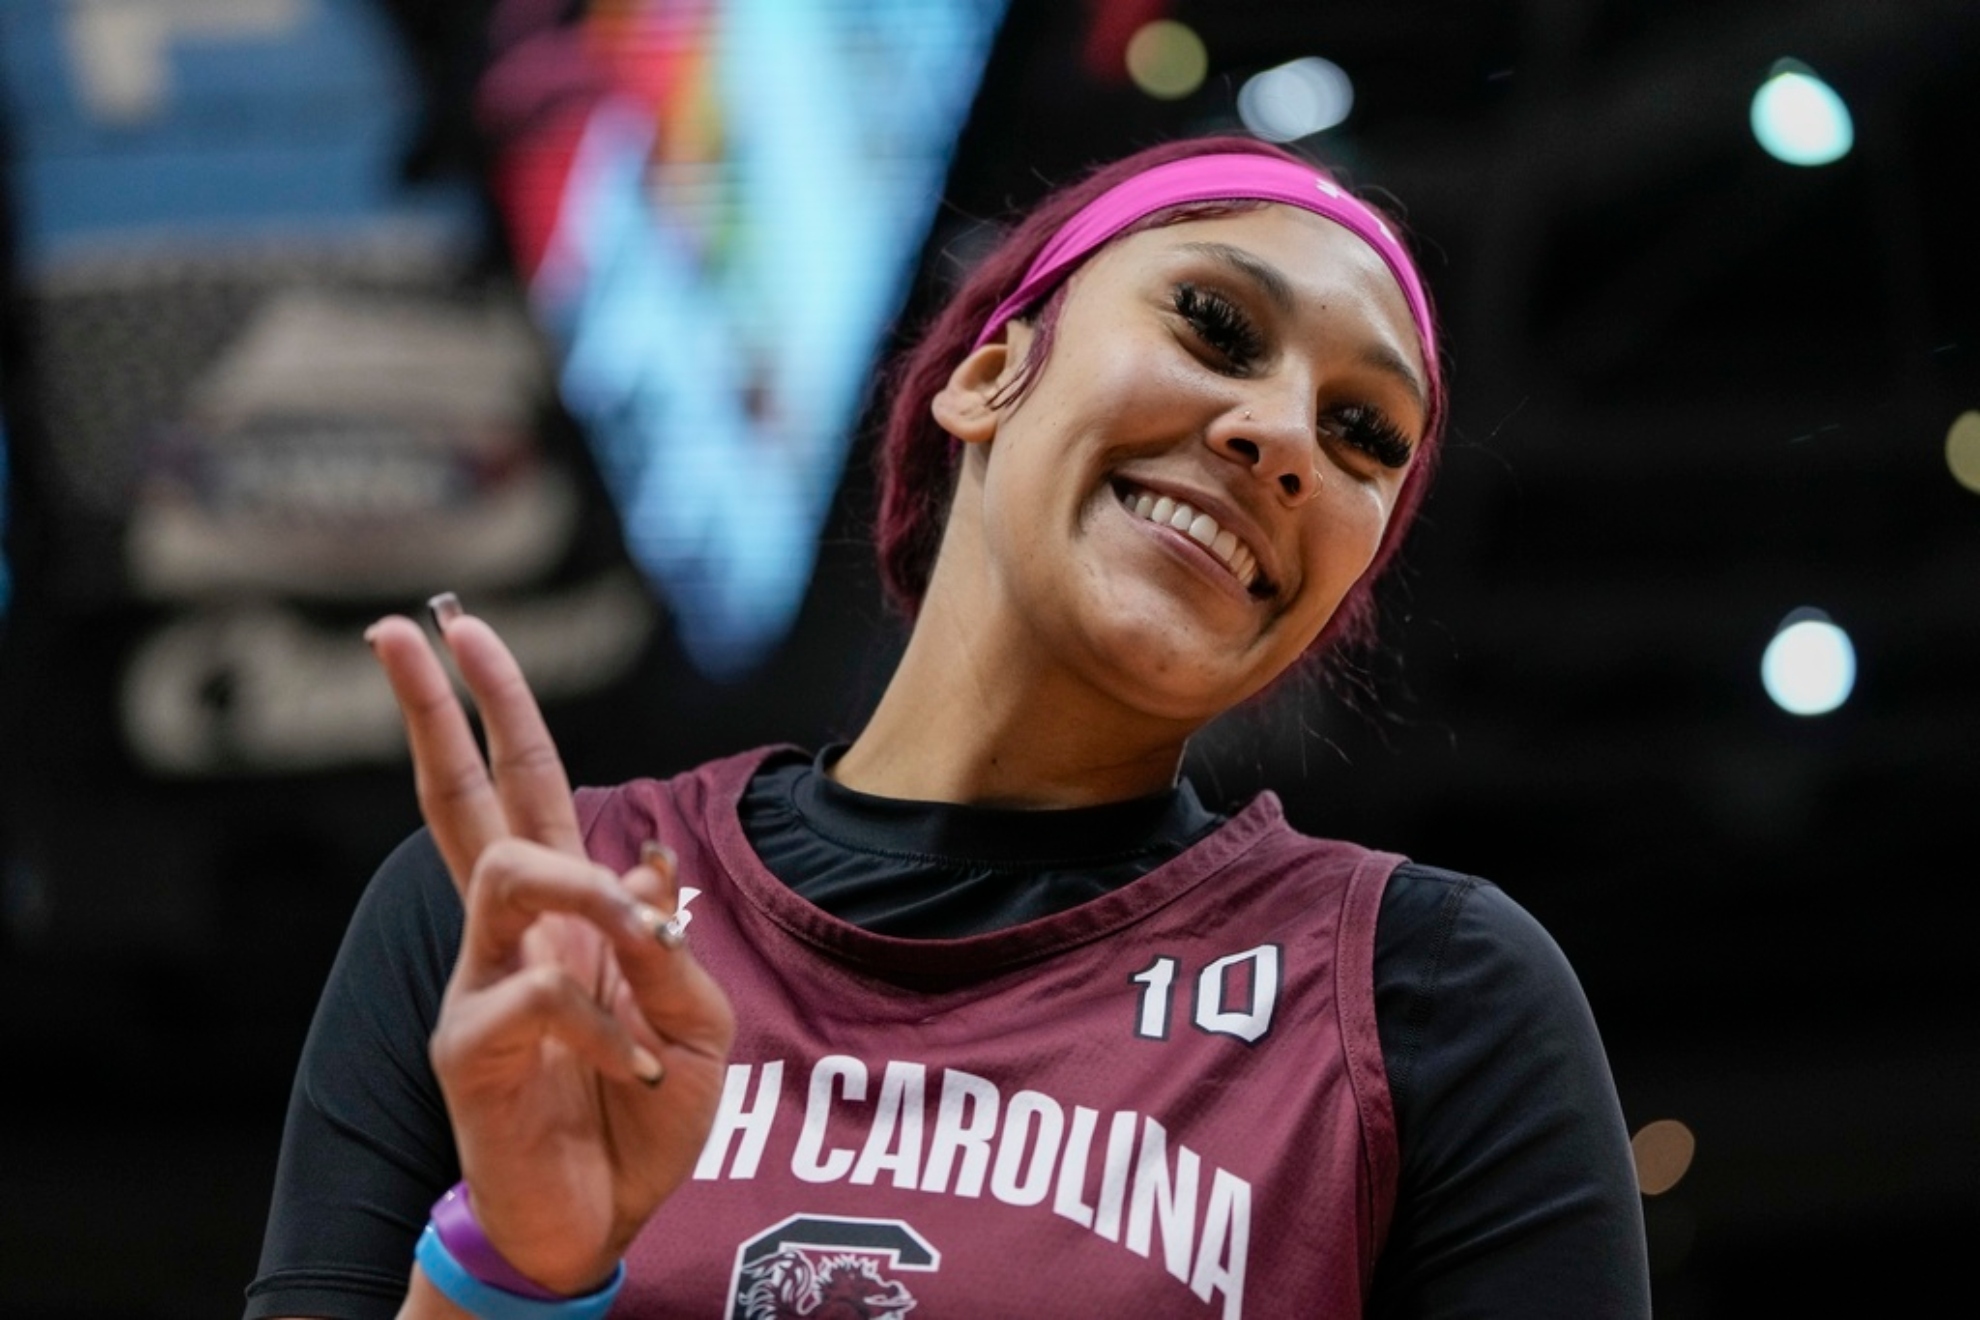 South Carolina NCAA Championship Appearances: When was the last time the womens team made it to the Finals?